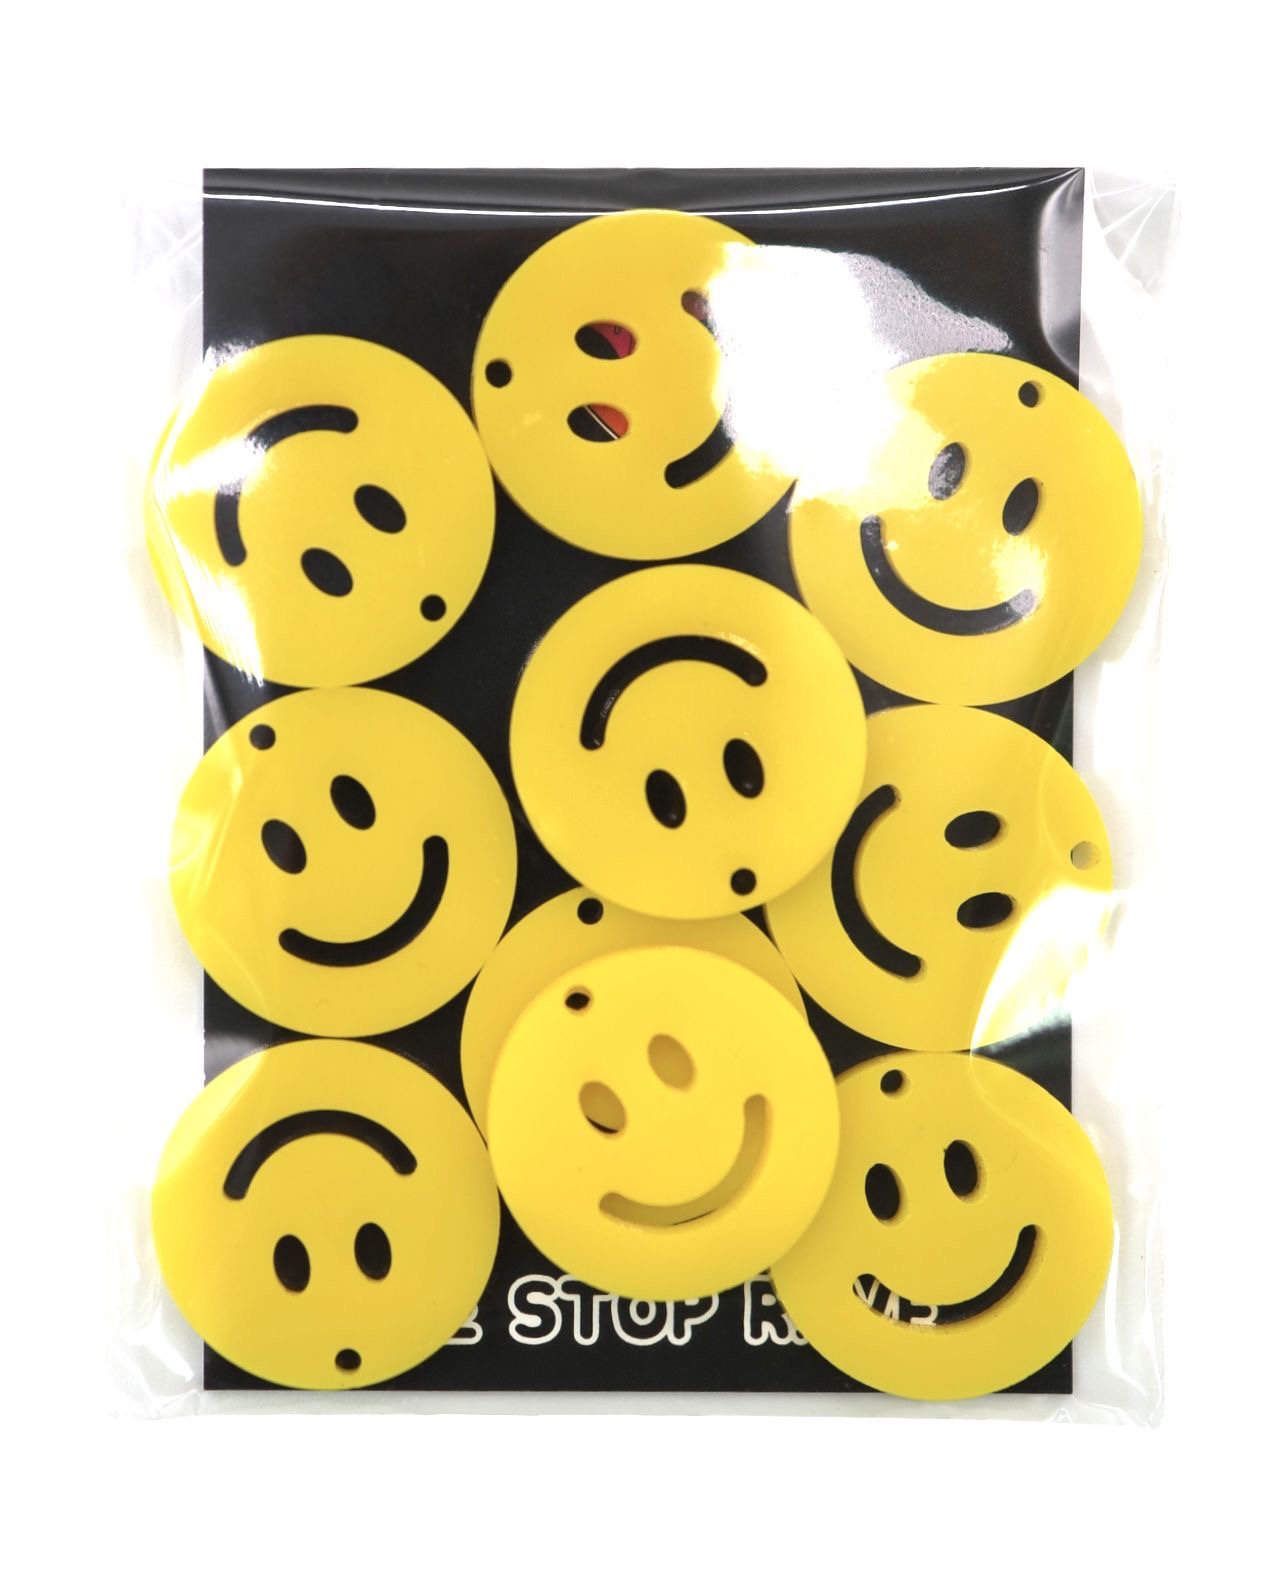 Stay Trippy Kandi Charms | Melted Smiley Face Charms | Unique Kandi Charms Black / 10